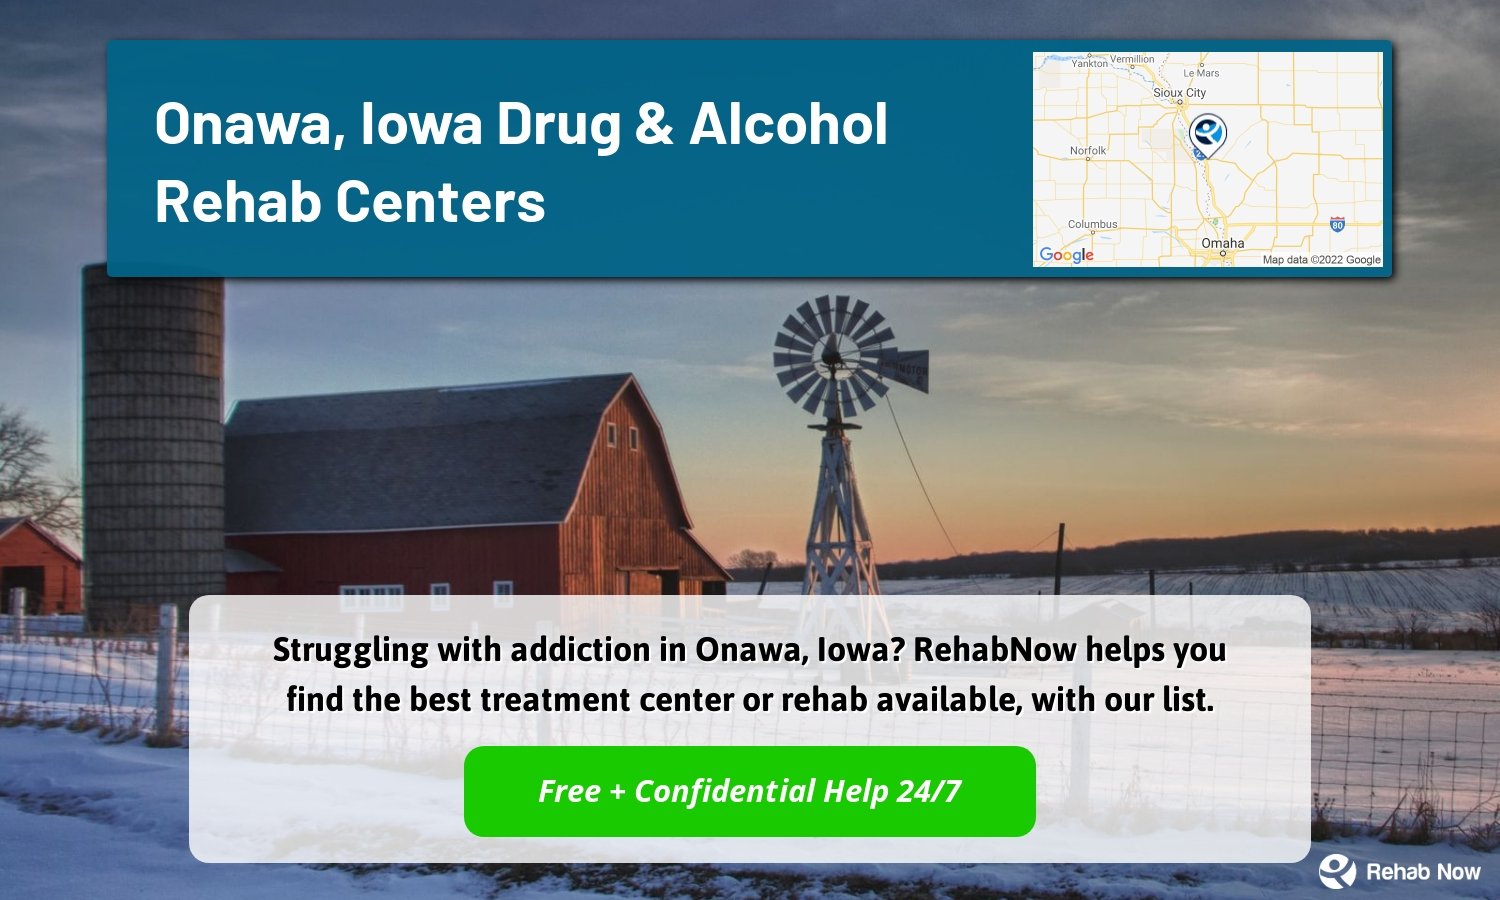 Struggling with addiction in Onawa, Iowa? RehabNow helps you find the best treatment center or rehab available, with our list.